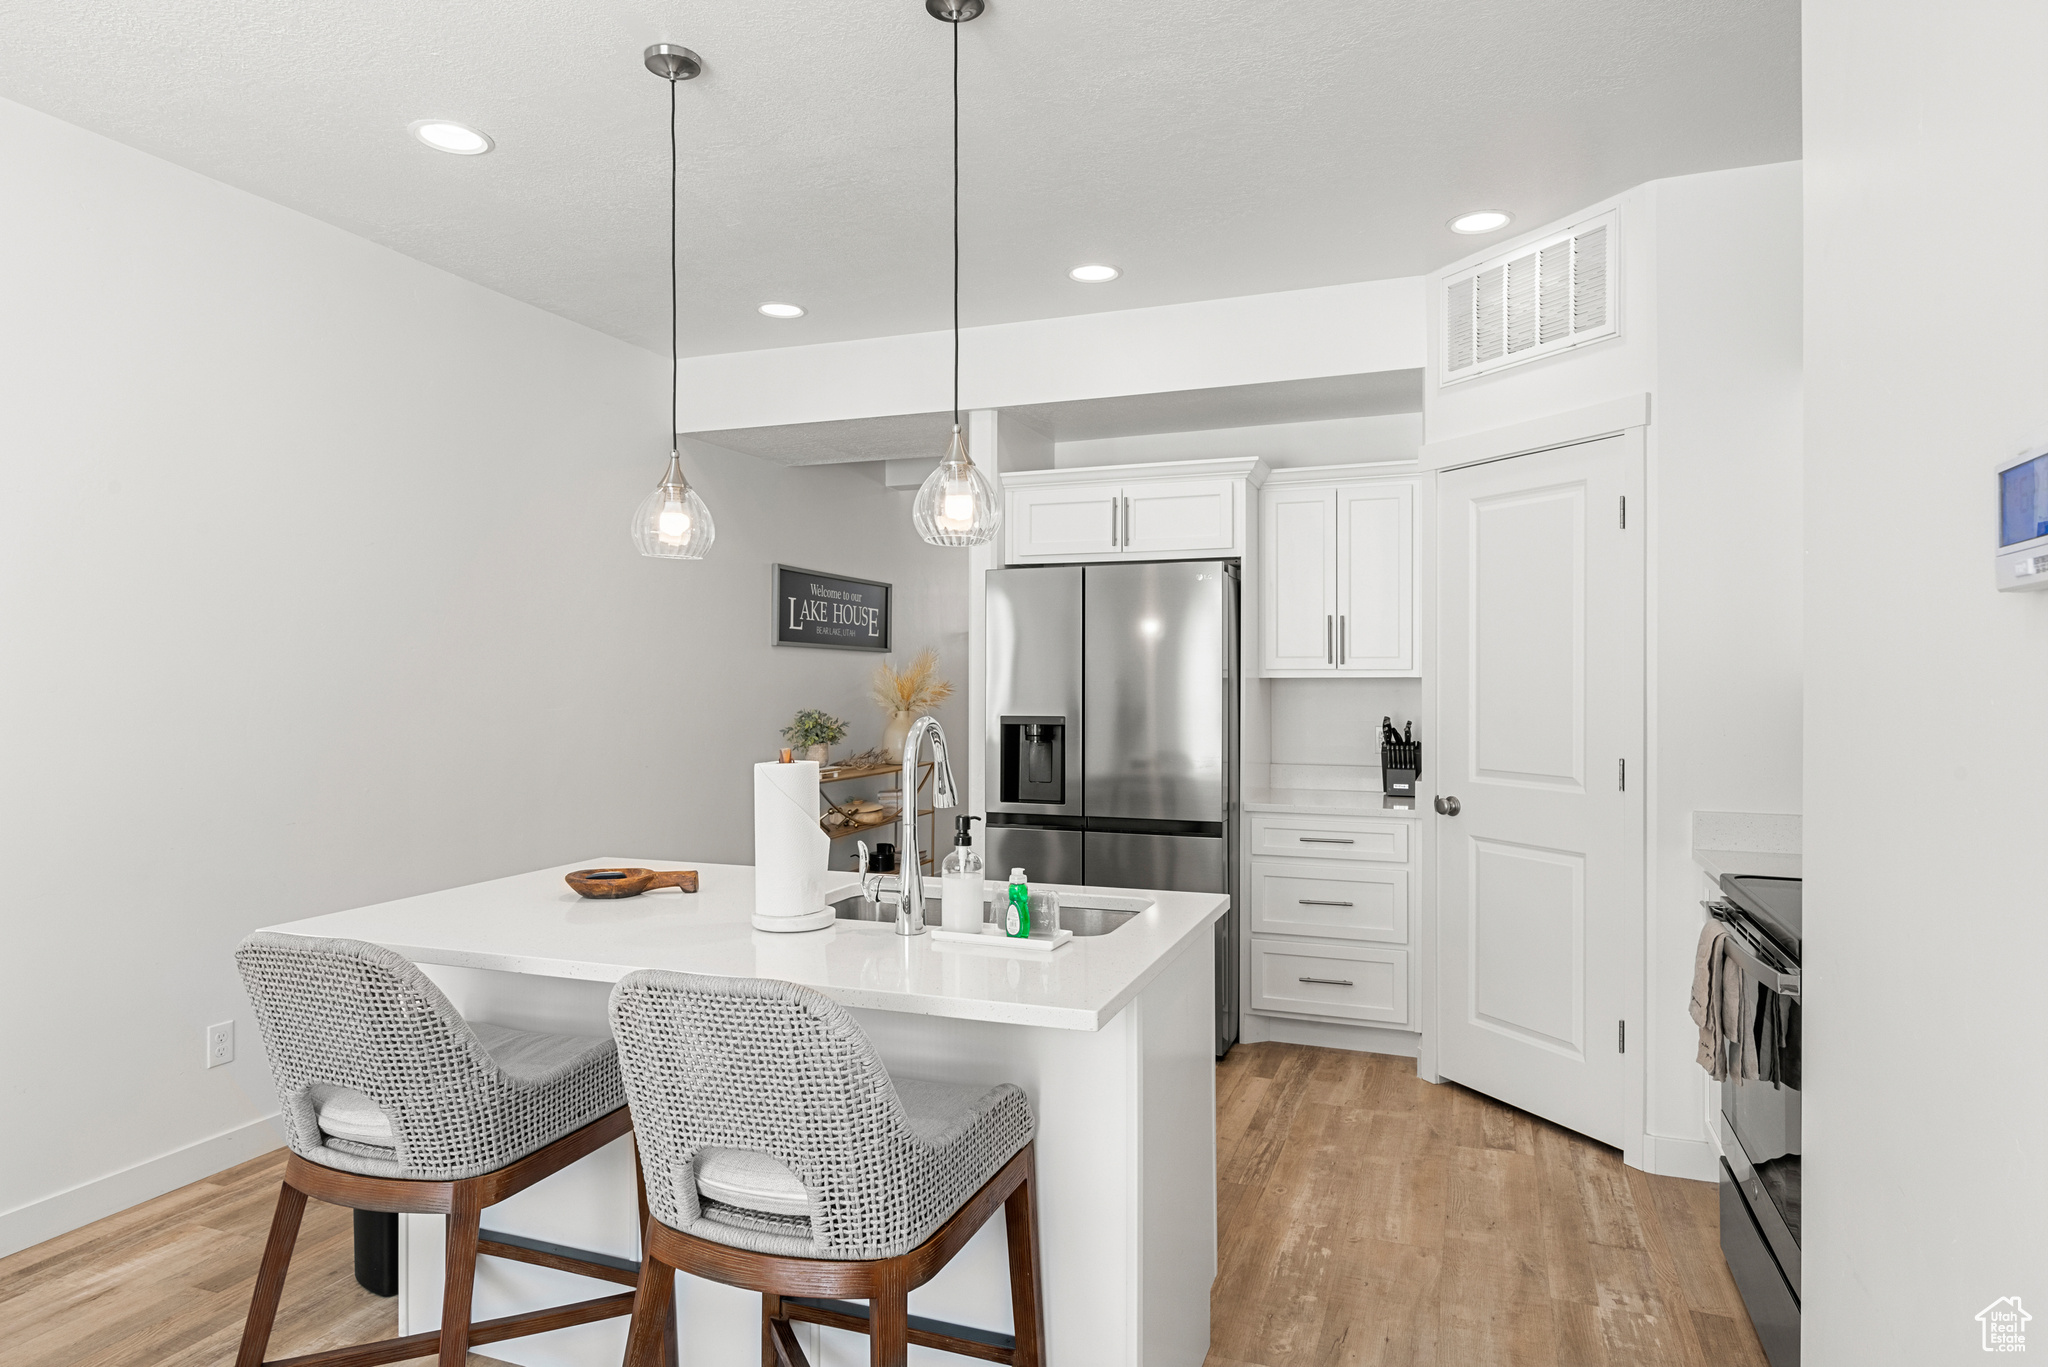 Kitchen with pendant lighting, stainless steel appliances, light hardwood / wood-style floors, and white cabinetry